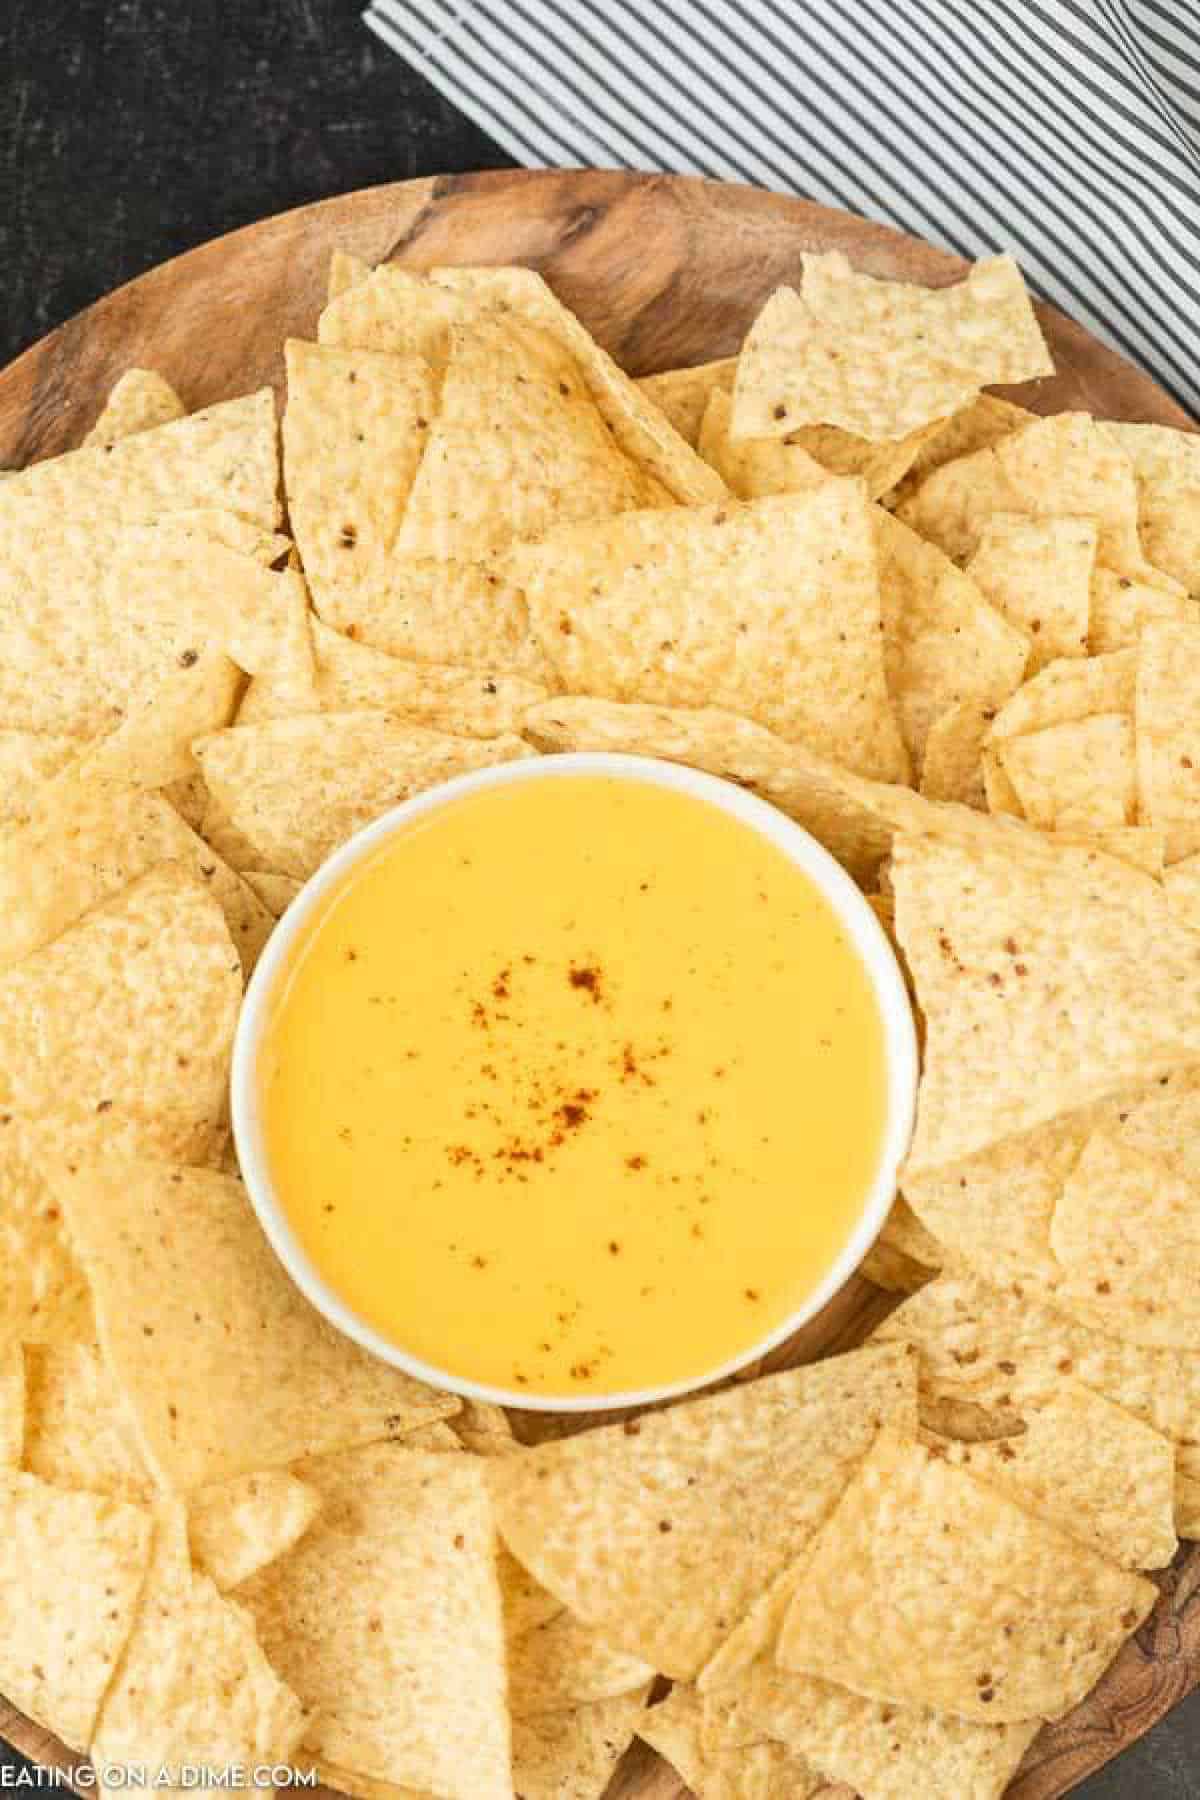 Tortilla chips and nacho cheese dip in a platter